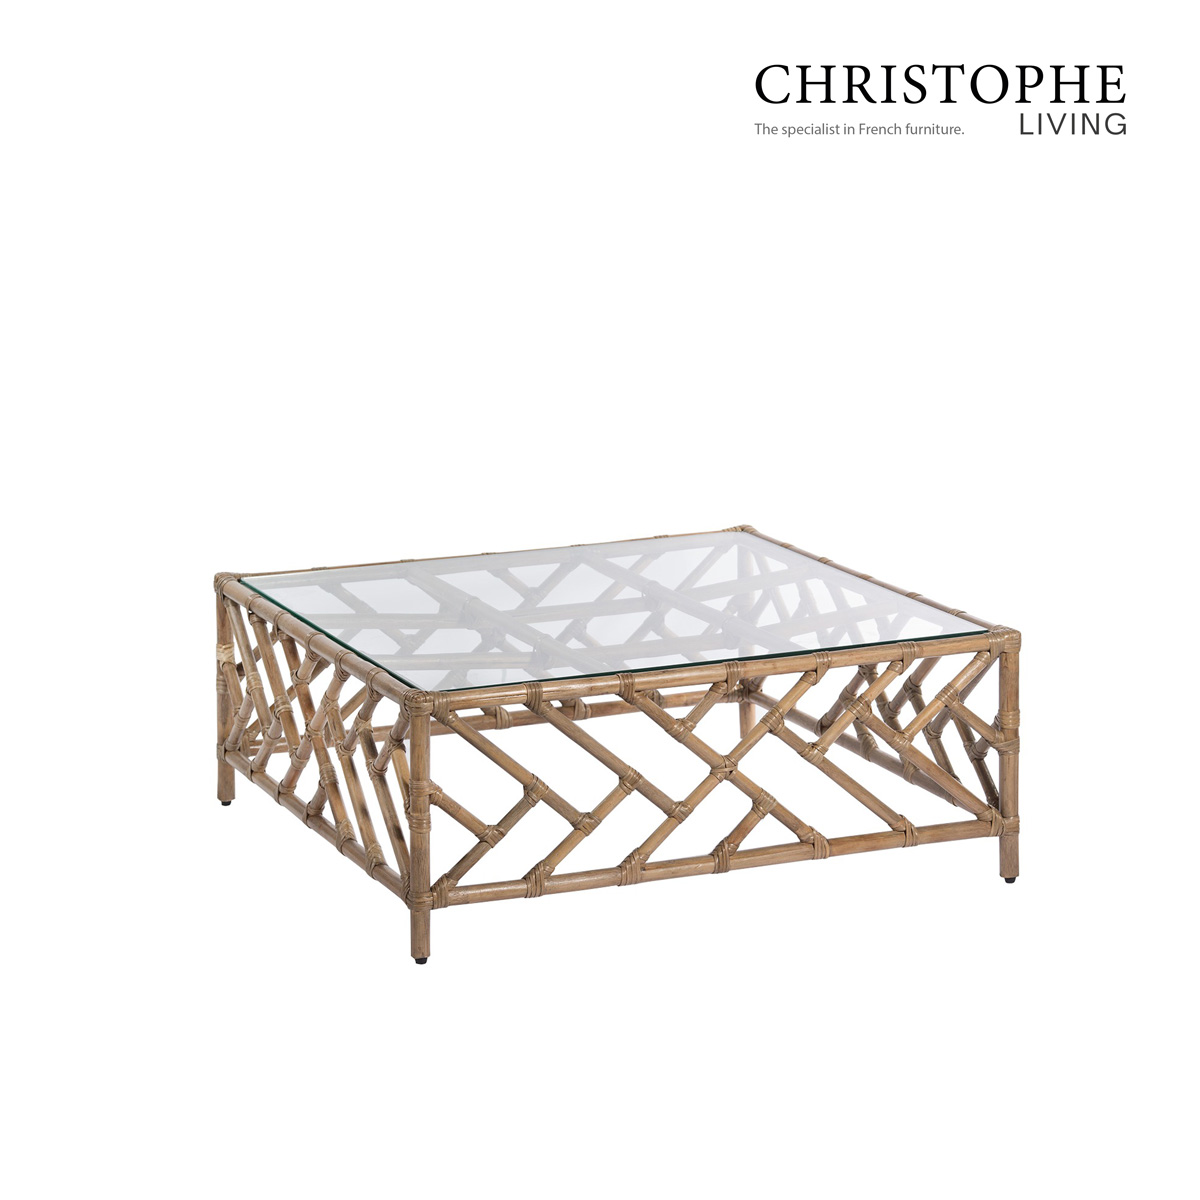 Qing Chippendale Style Coffee Table in Mud Grey with Natural Rattan and Glass Top for Living Room